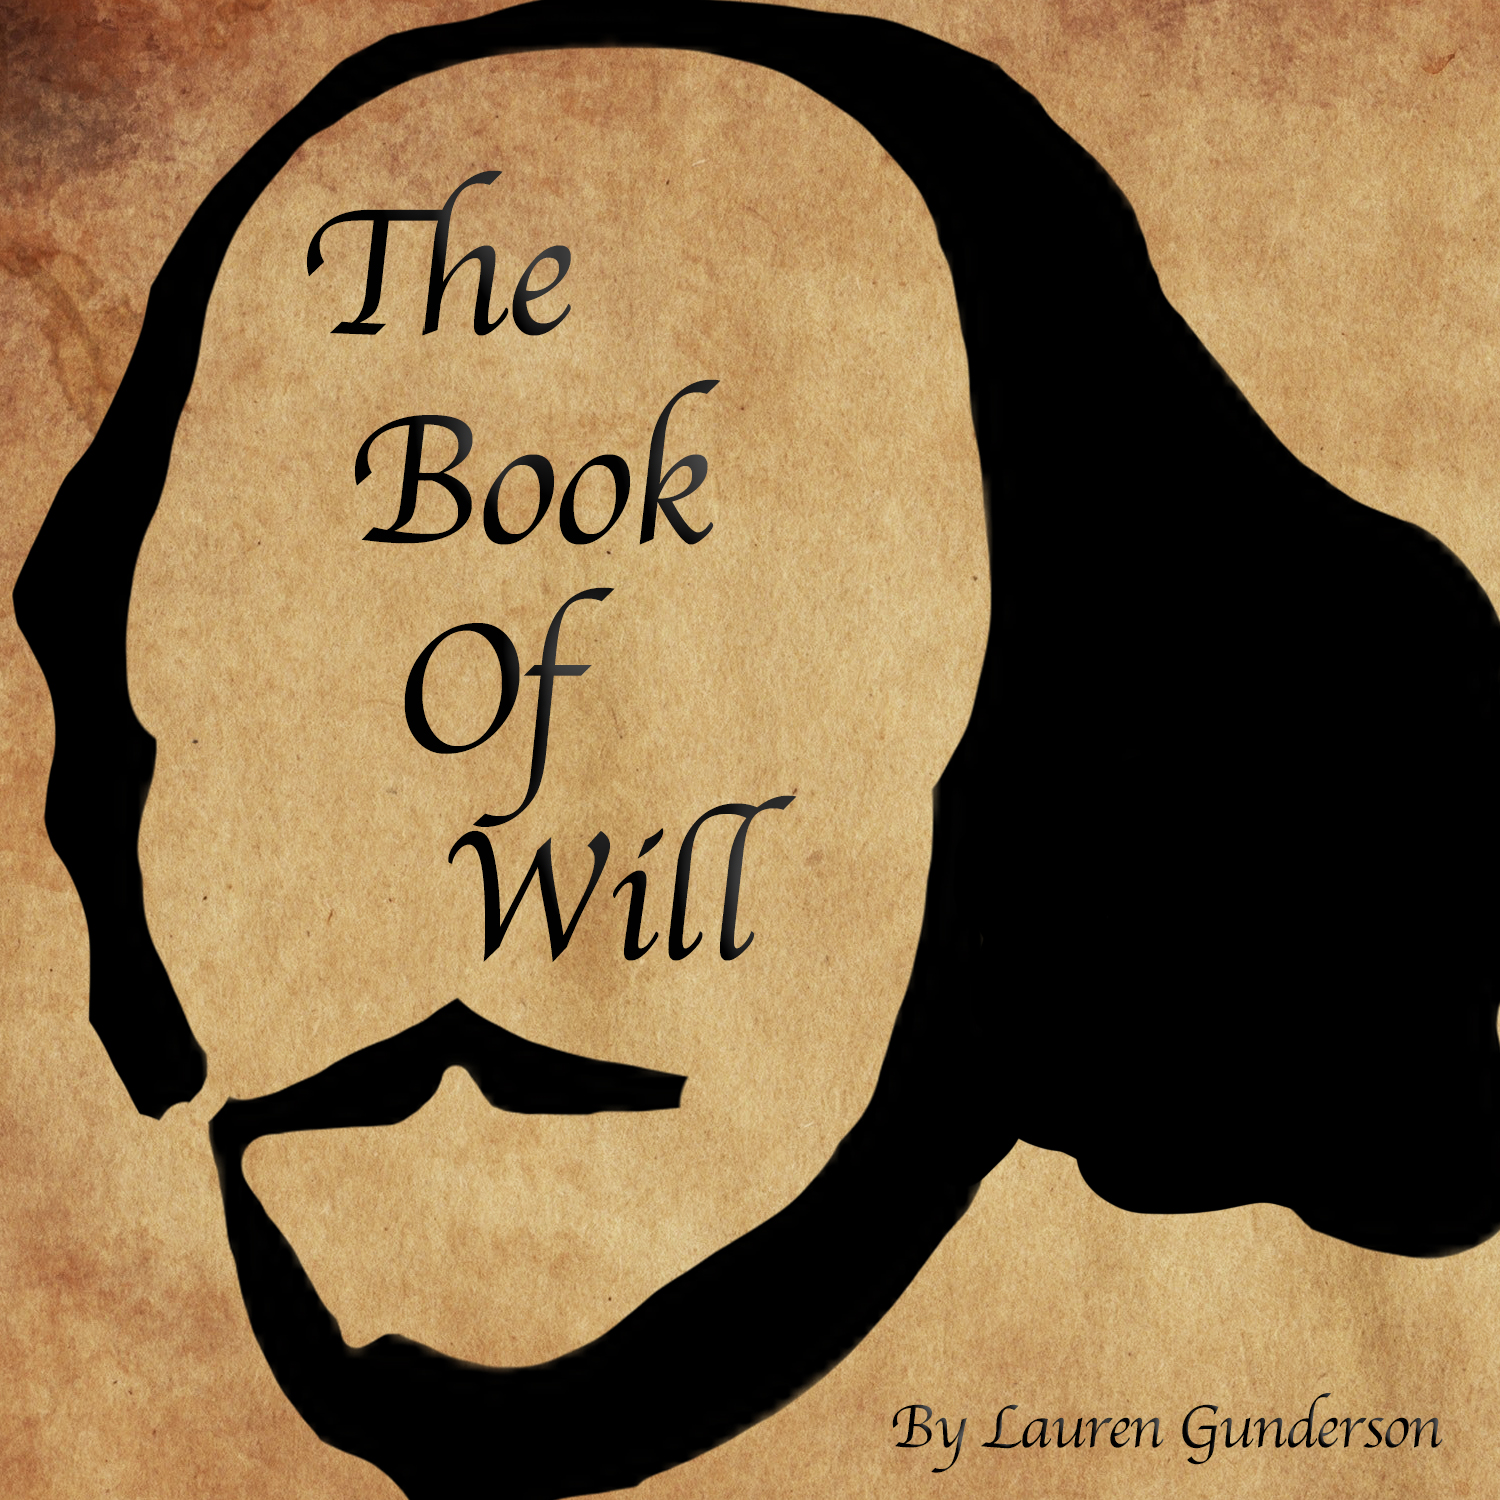 The Book of Will show title